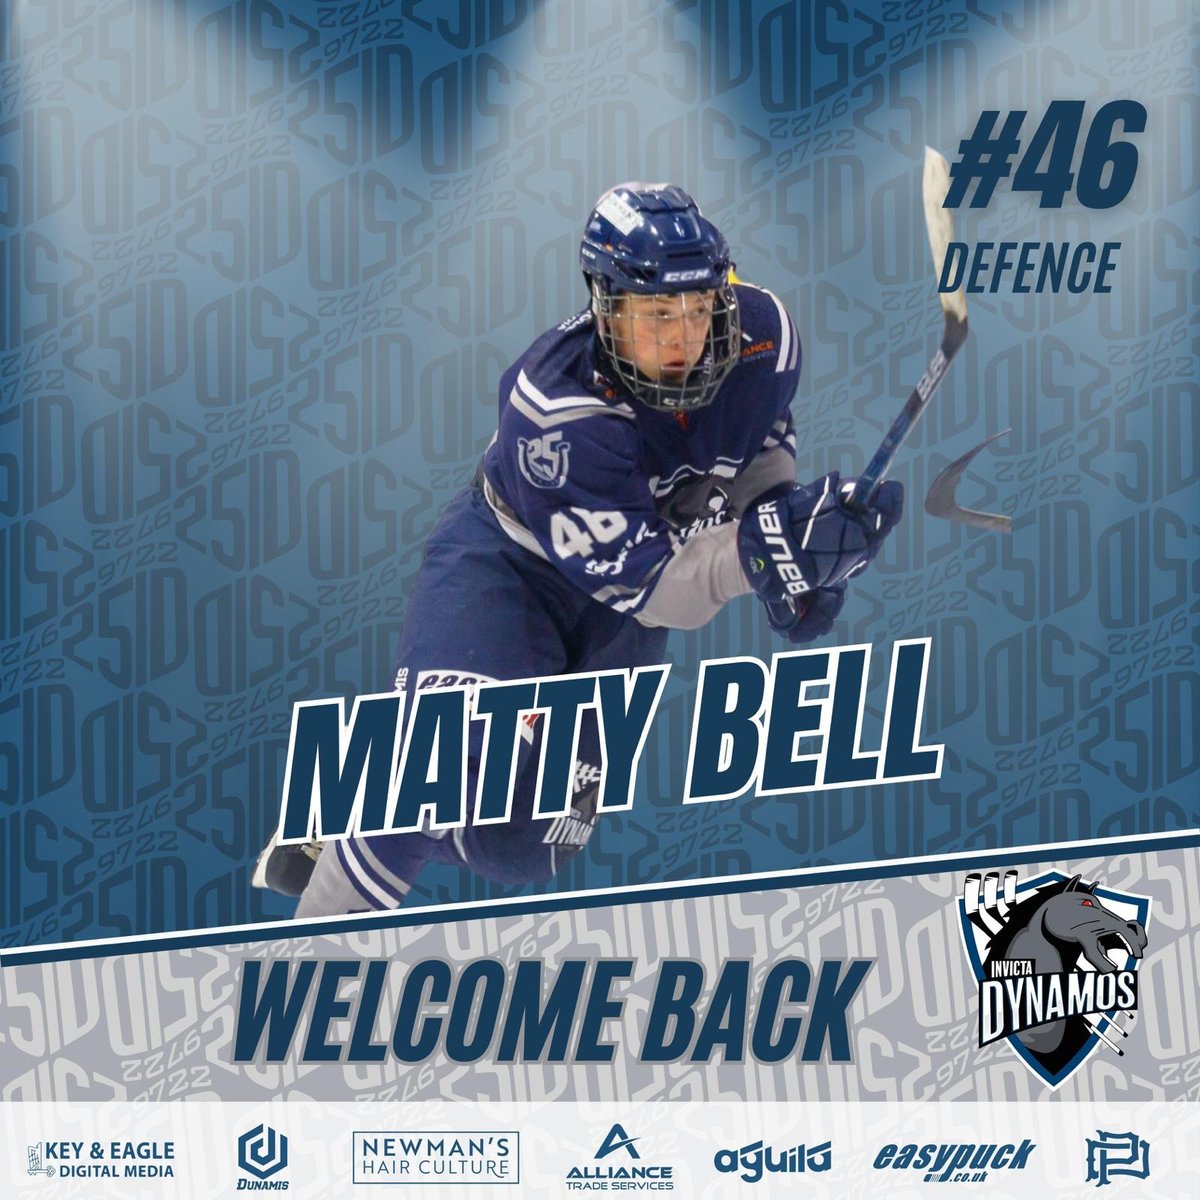 Matty Bell is on a 2 way contract with @InvictaDynamos and the Mustang's again this season but this time it's Mo's 1st to help further Matty's development and give him maximum training and game time. Watch out for him in a Mustang's shirt when he is available. #oneinvicta